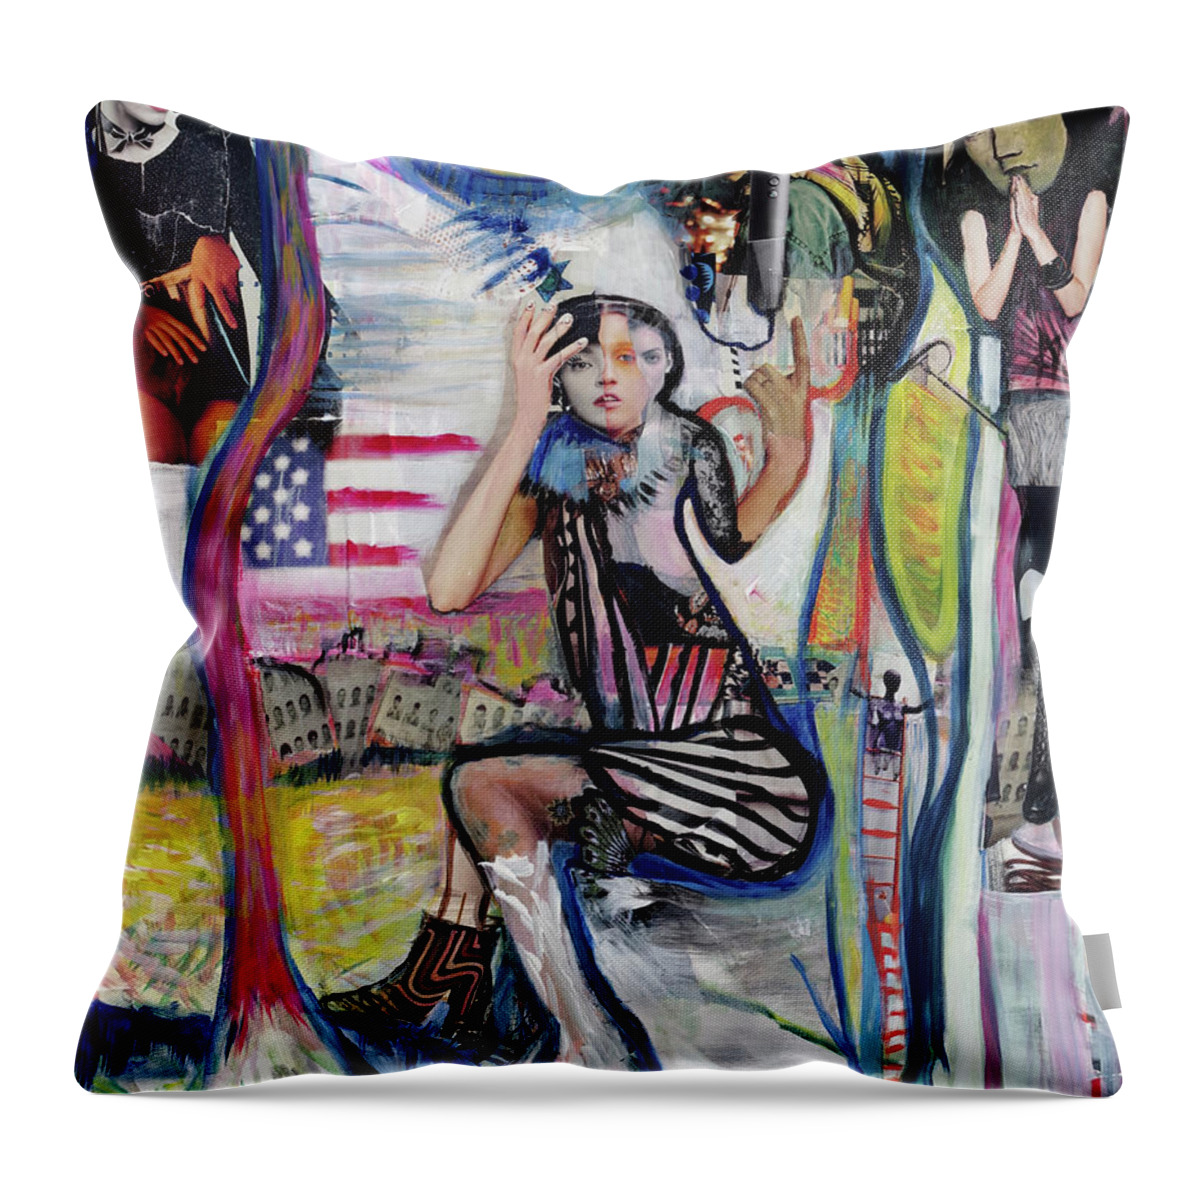  Throw Pillow featuring the mixed media Out of Faith by Val Zee McCune